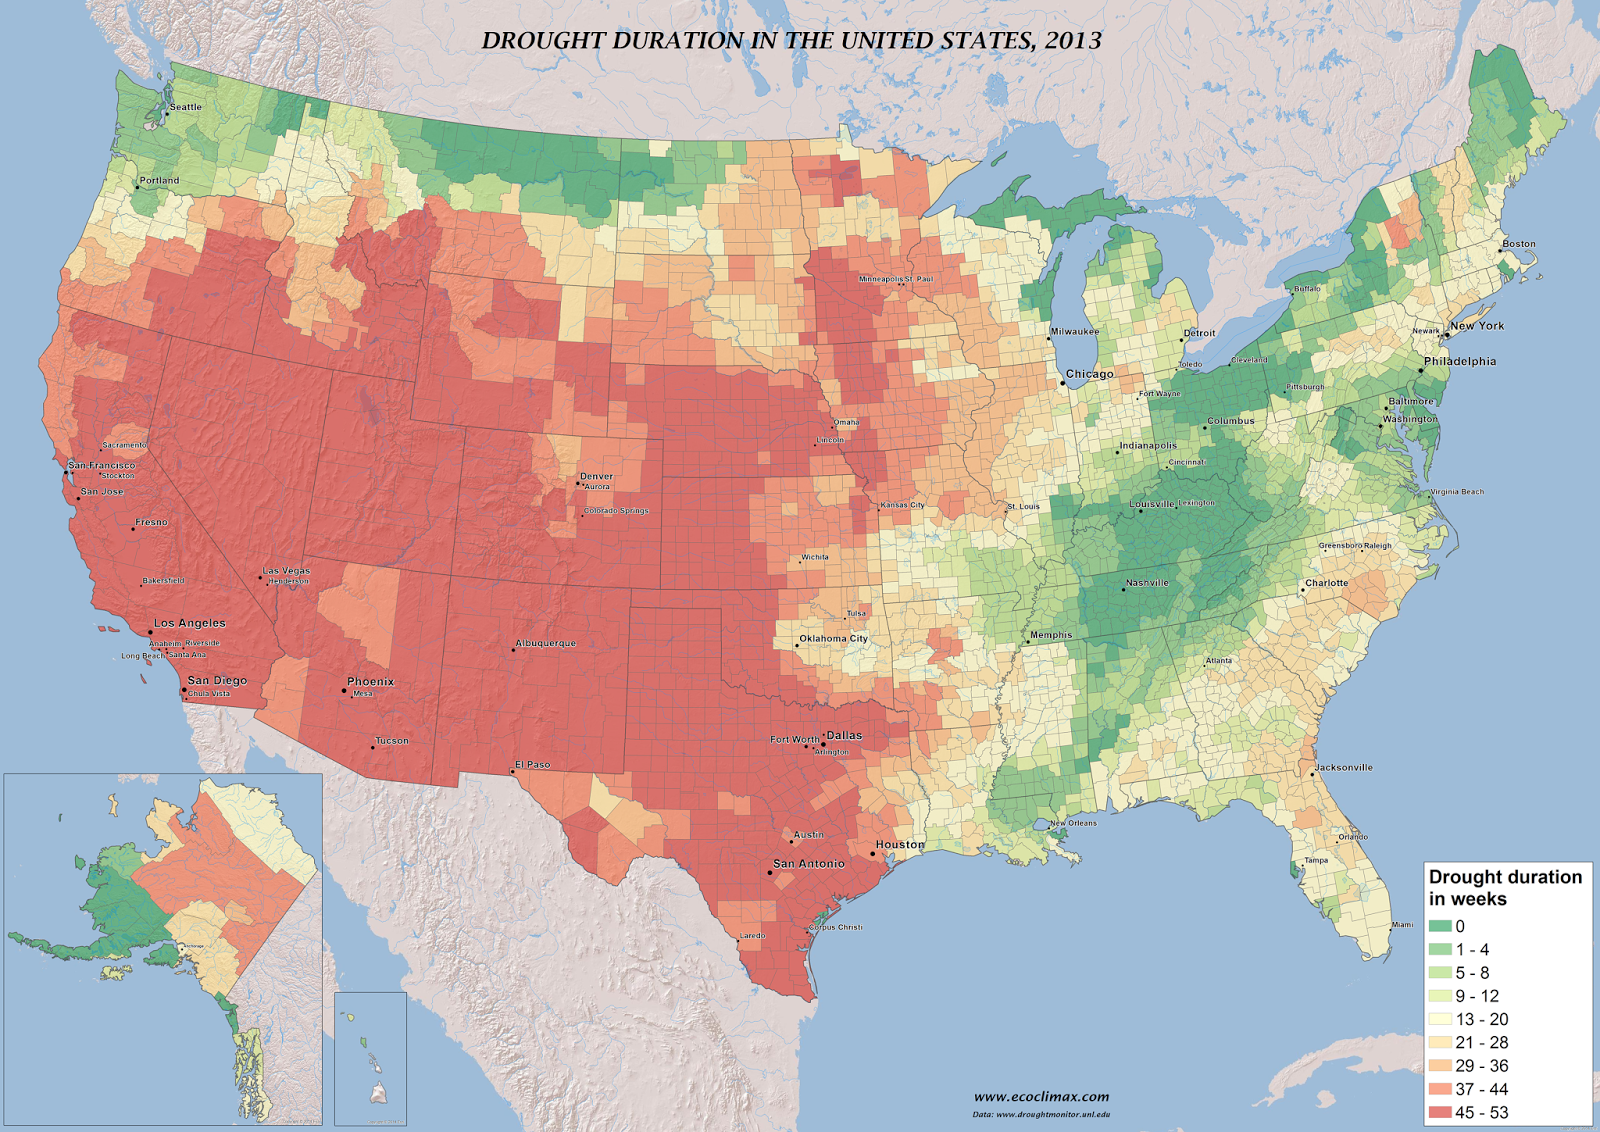 Drought duration in the United States (2013)